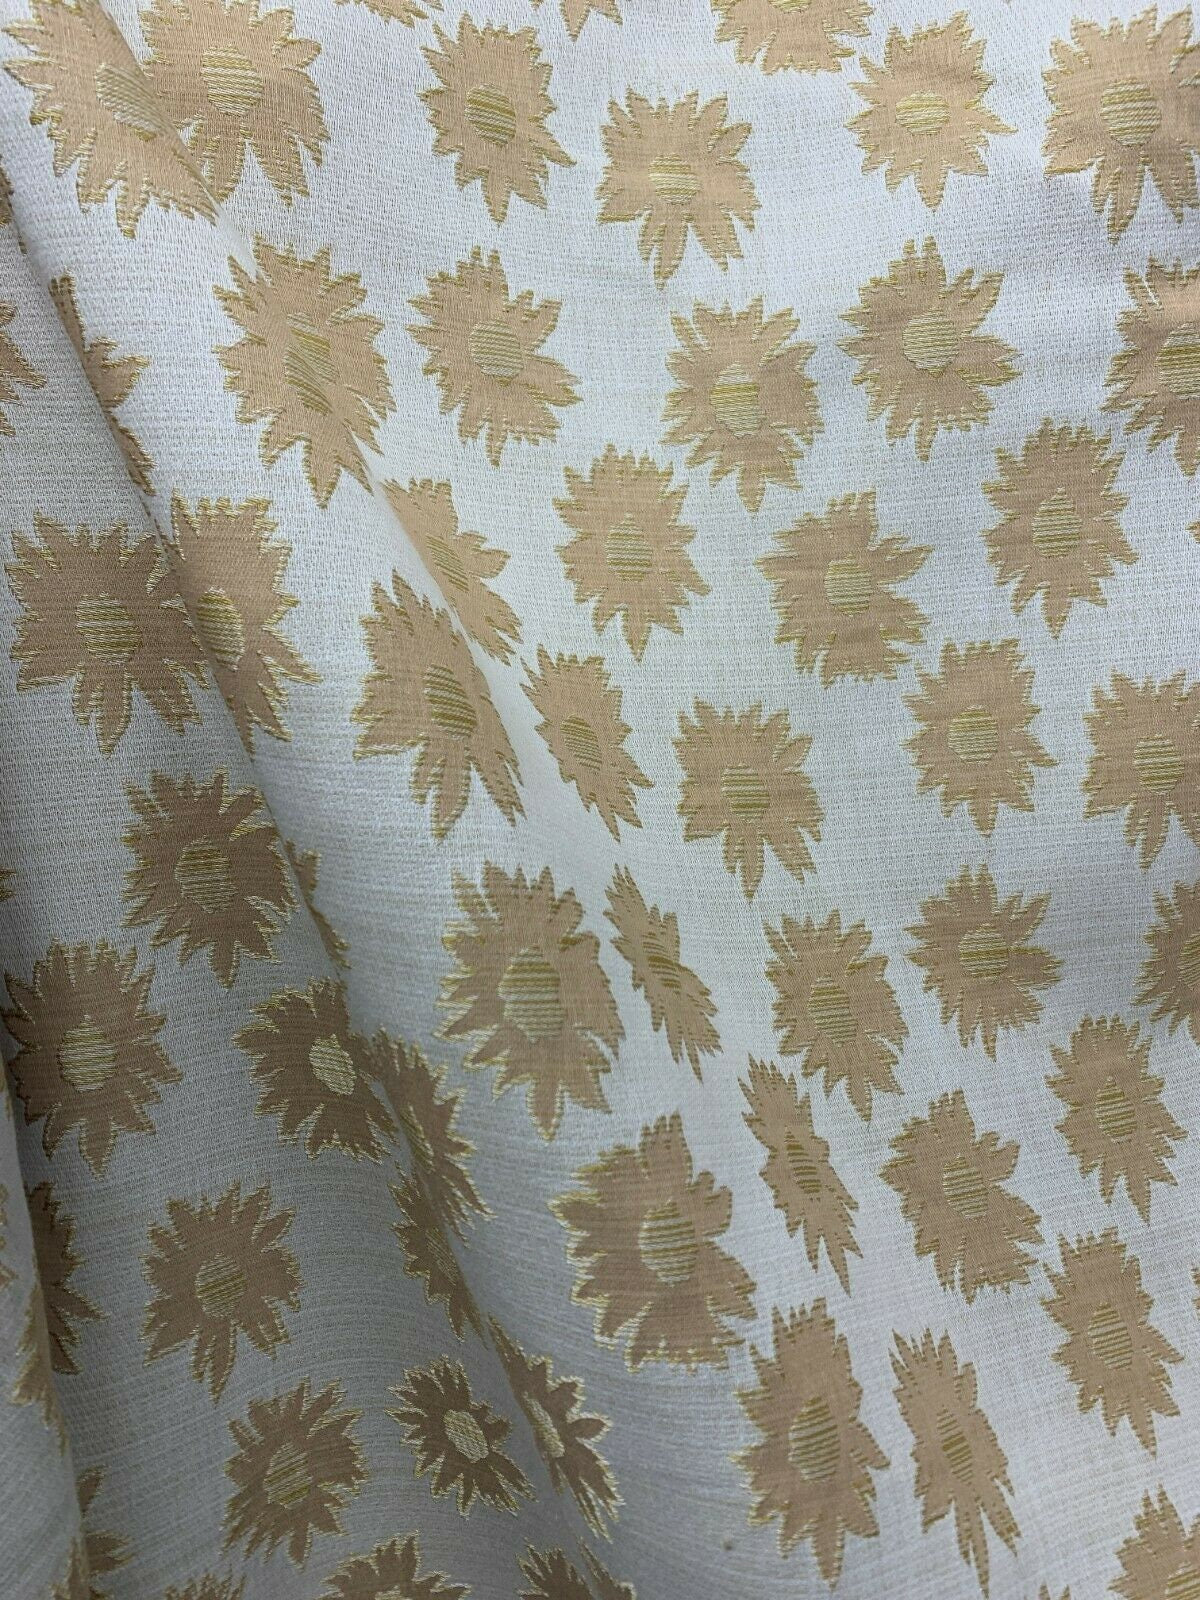 BEIGE TAN Sunflower Floral Brocade Upholstery Drapery Fabric (54 in.) Sold By The Yard